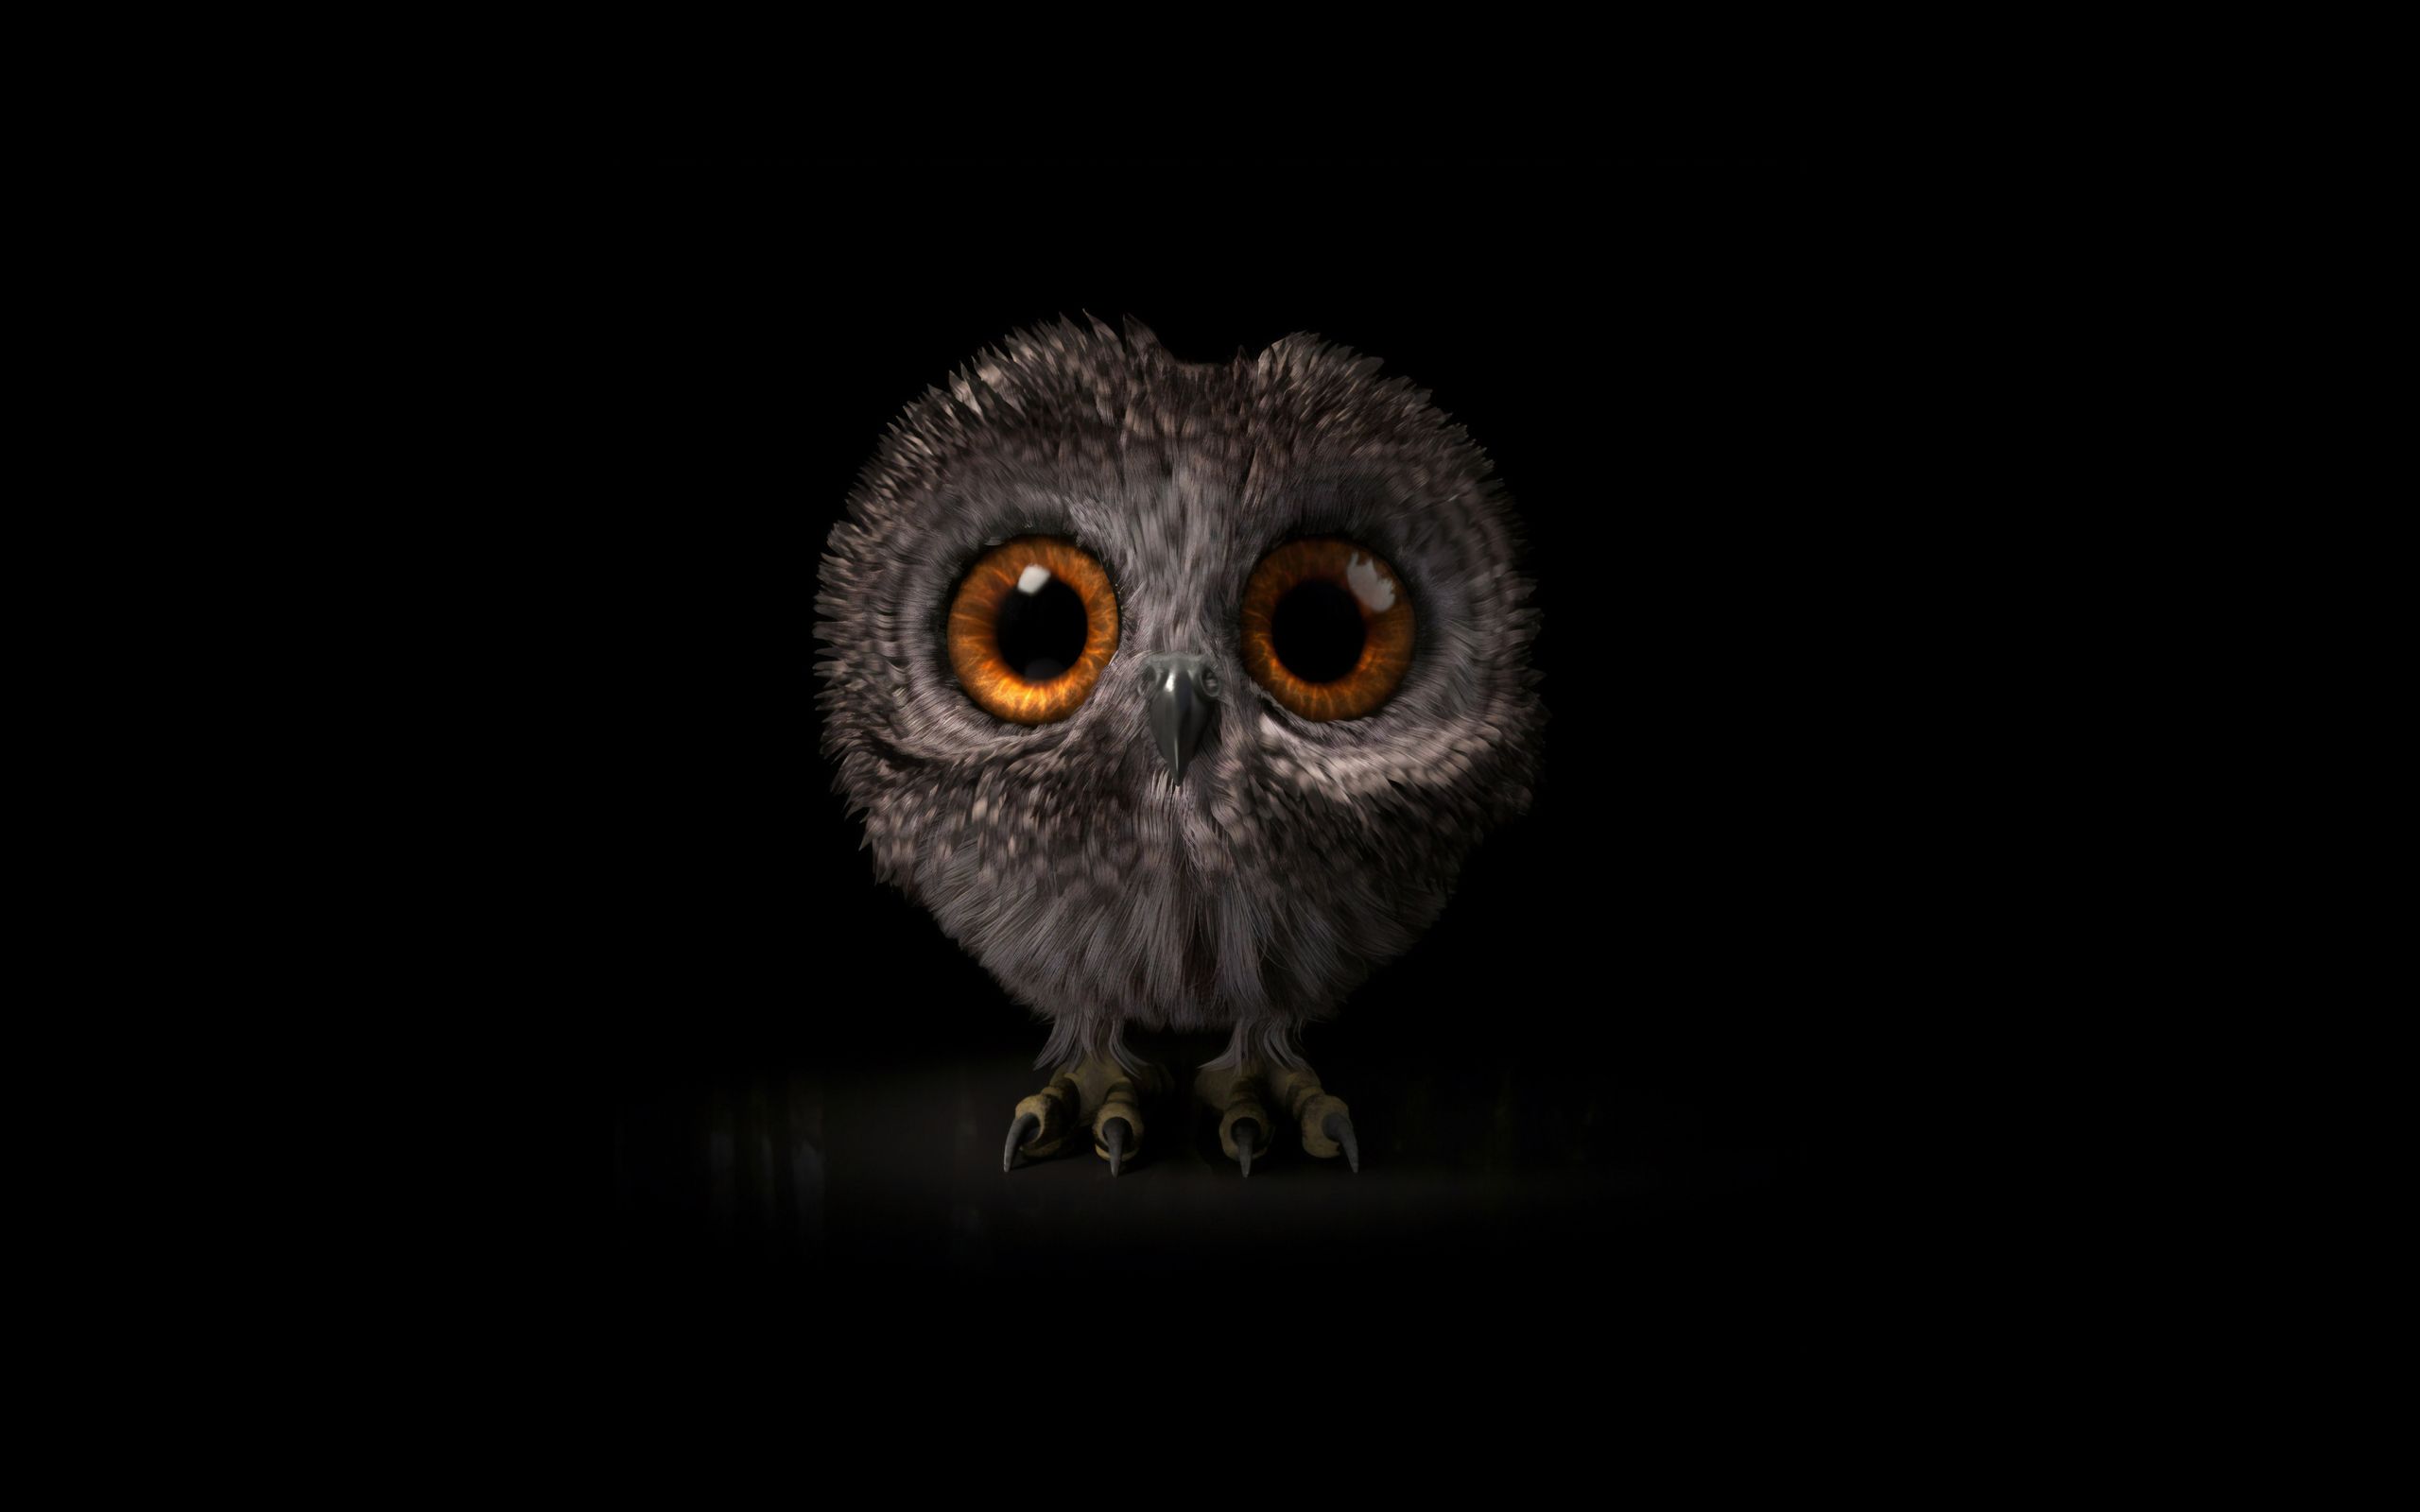 Wallpapers of Baby Animal, Cute, Owl, Owlet backgrounds & HD image.